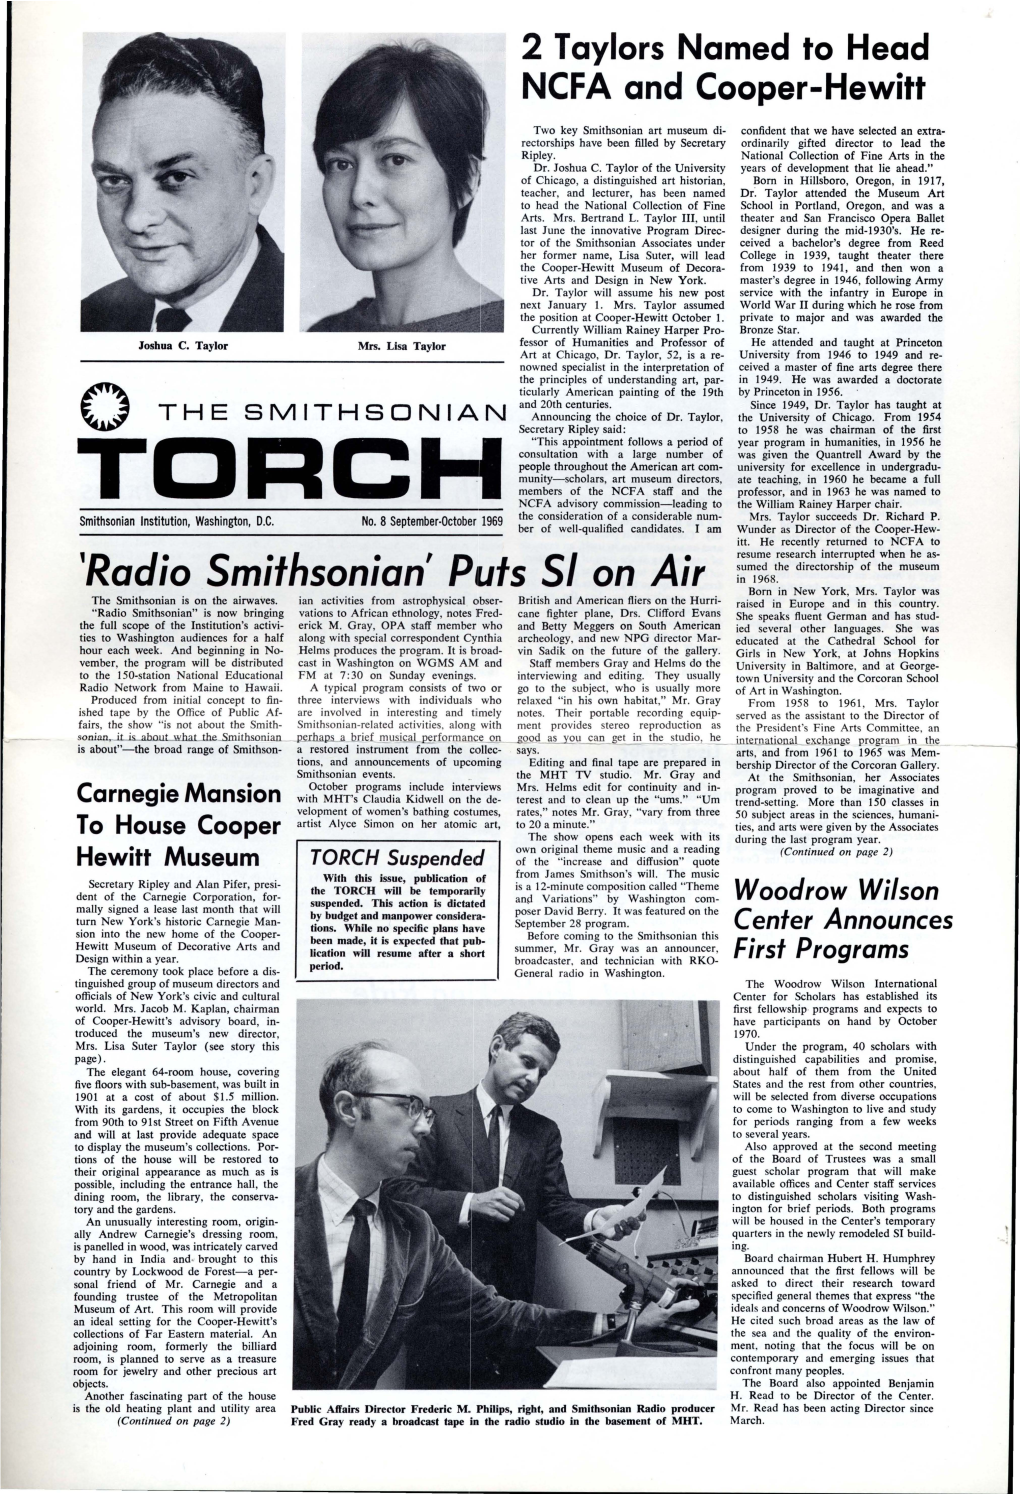 Radio Smithsonian' Puts 51 on Air in 1968